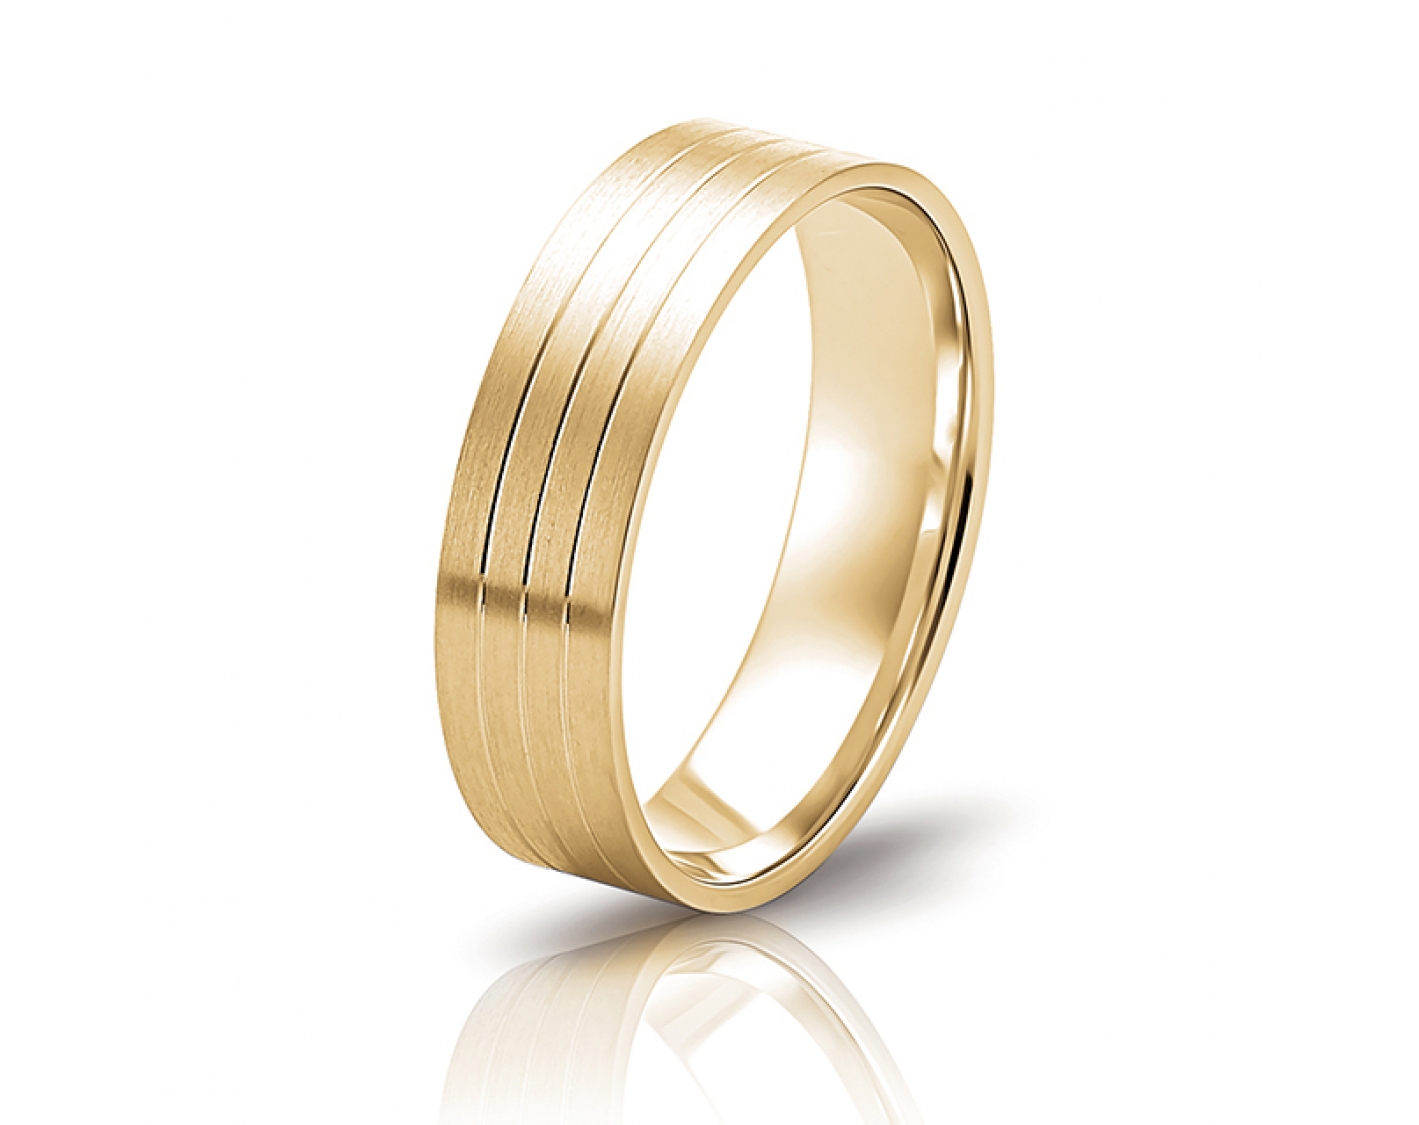 18k yellow gold 6mm matte wedding band with inlays Photos & images